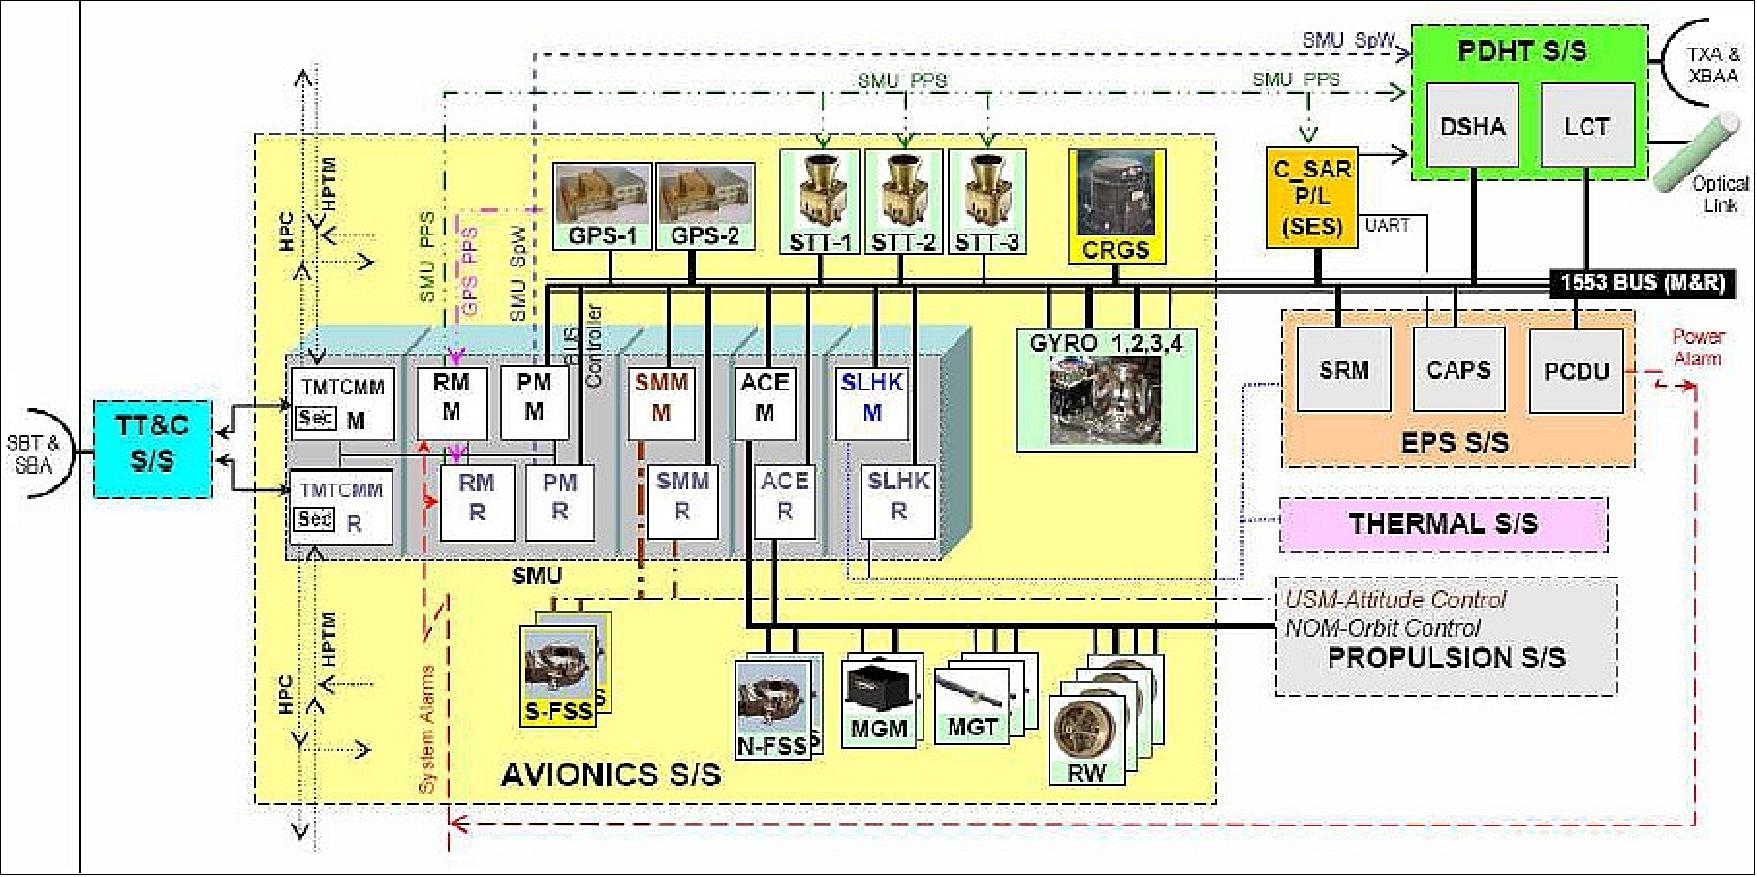 Architecture of the avionics subsystem